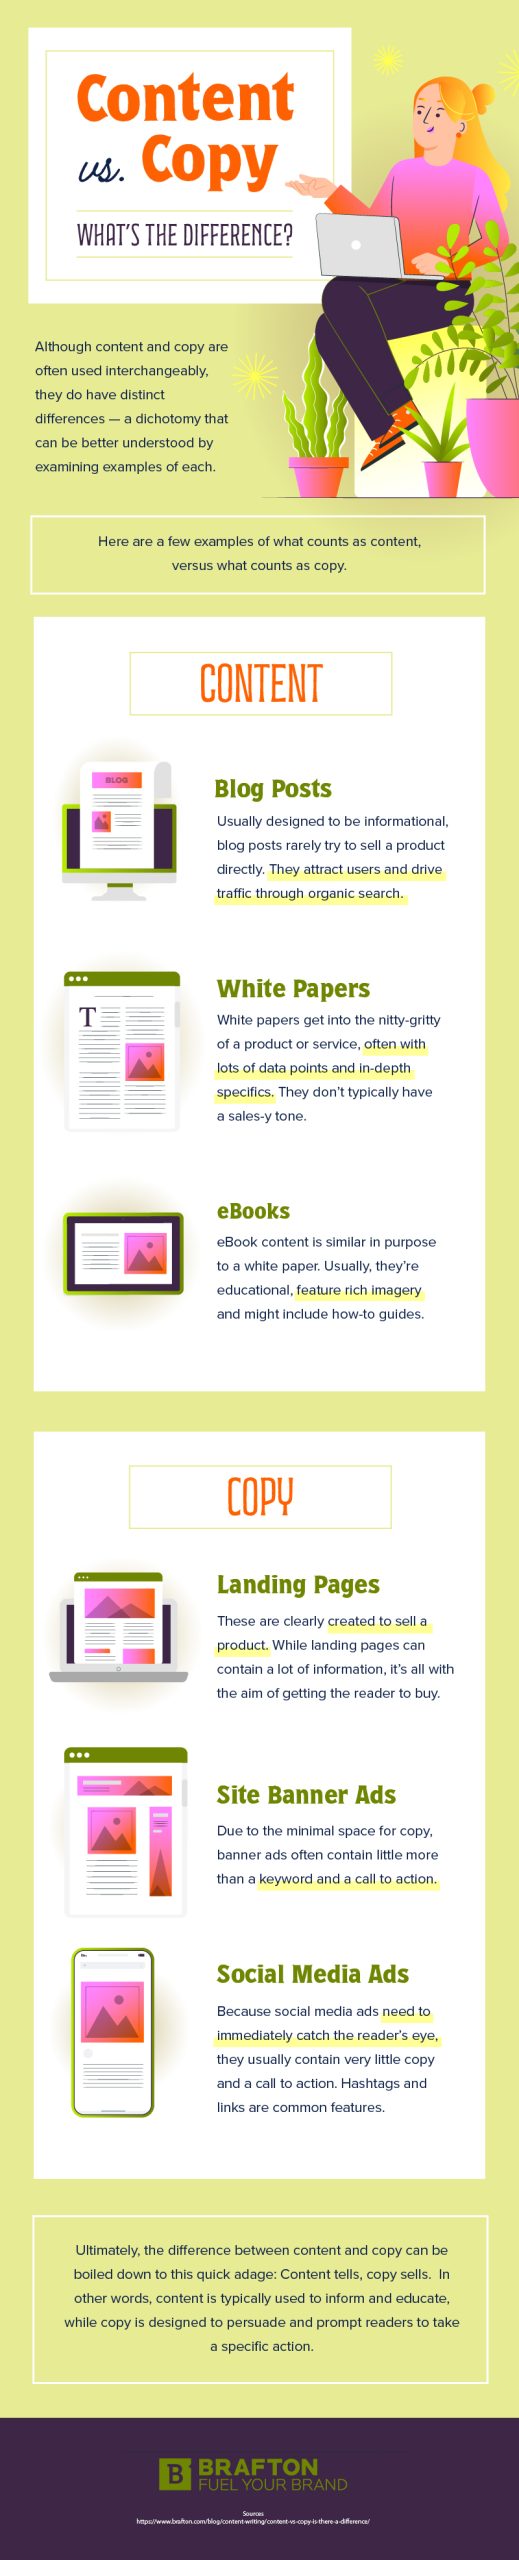 Infographic Content Vs Copy What's the Difference